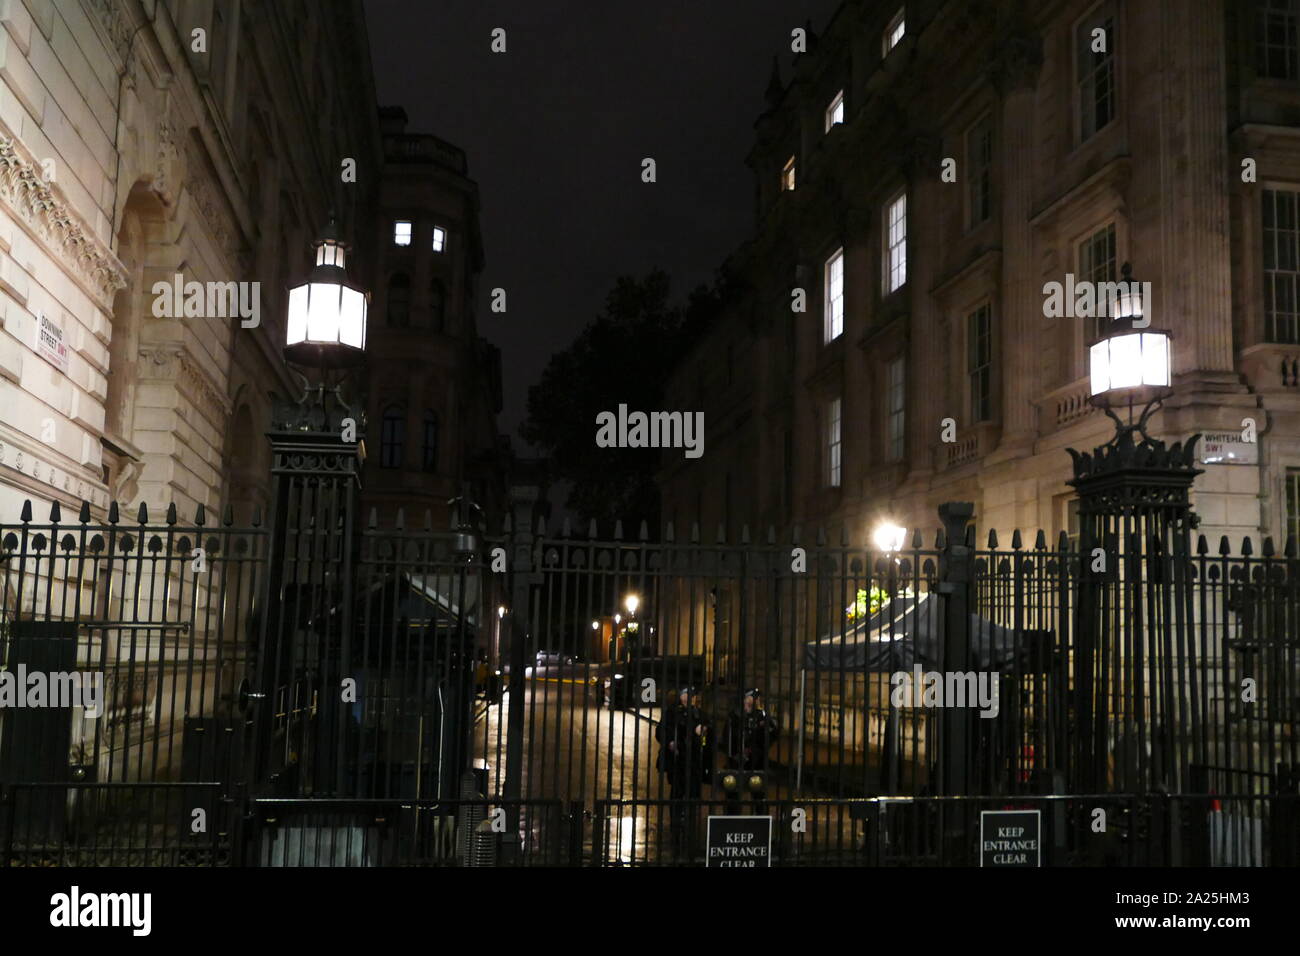 Gates guarding the entrance to Downing Street, London (home and office of the Prime Minister of the United Kingdom. Stock Photo